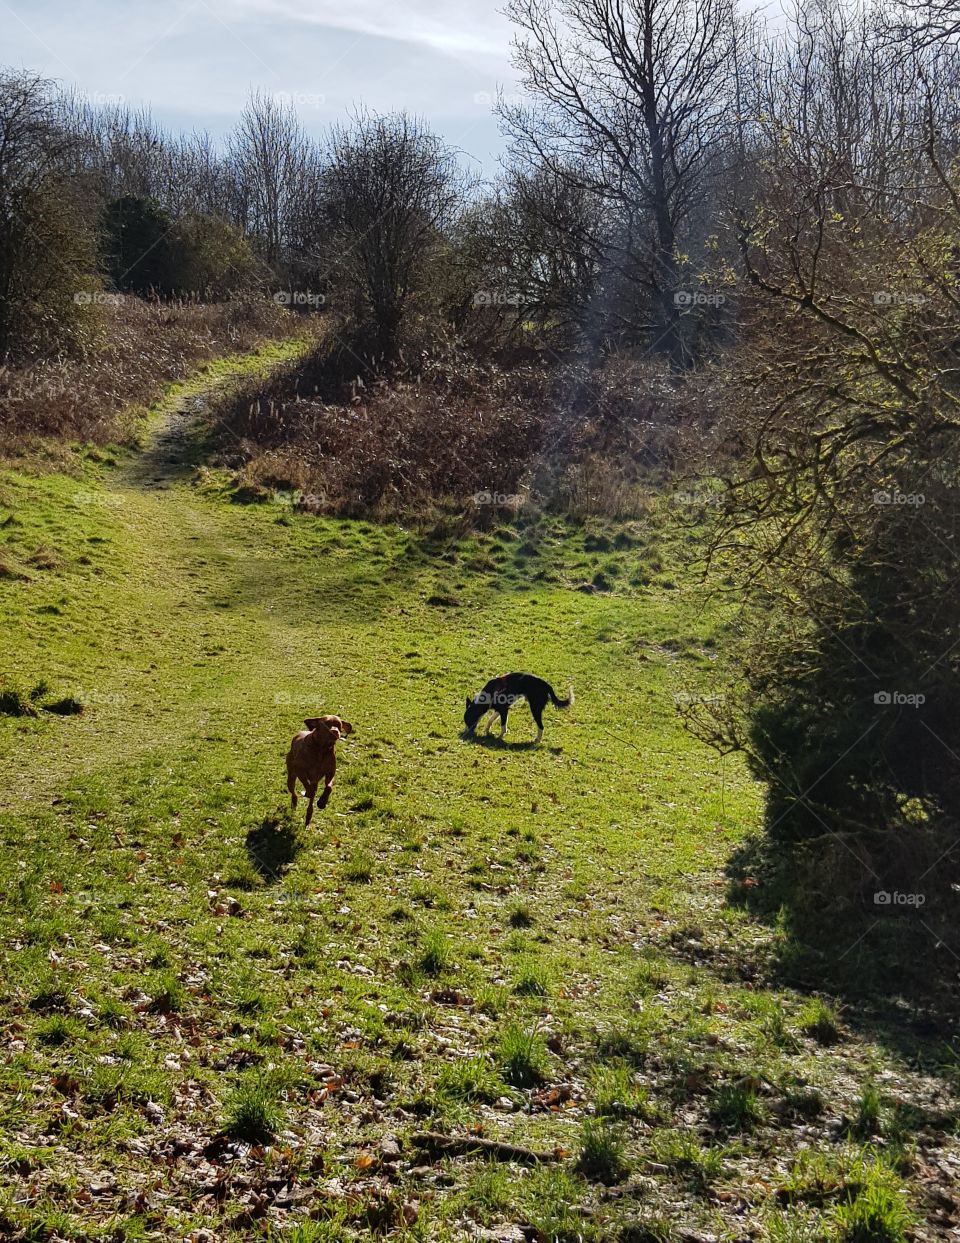 love our walks up the park especially when the sun is shining. max and his friend hollie how gorgeous